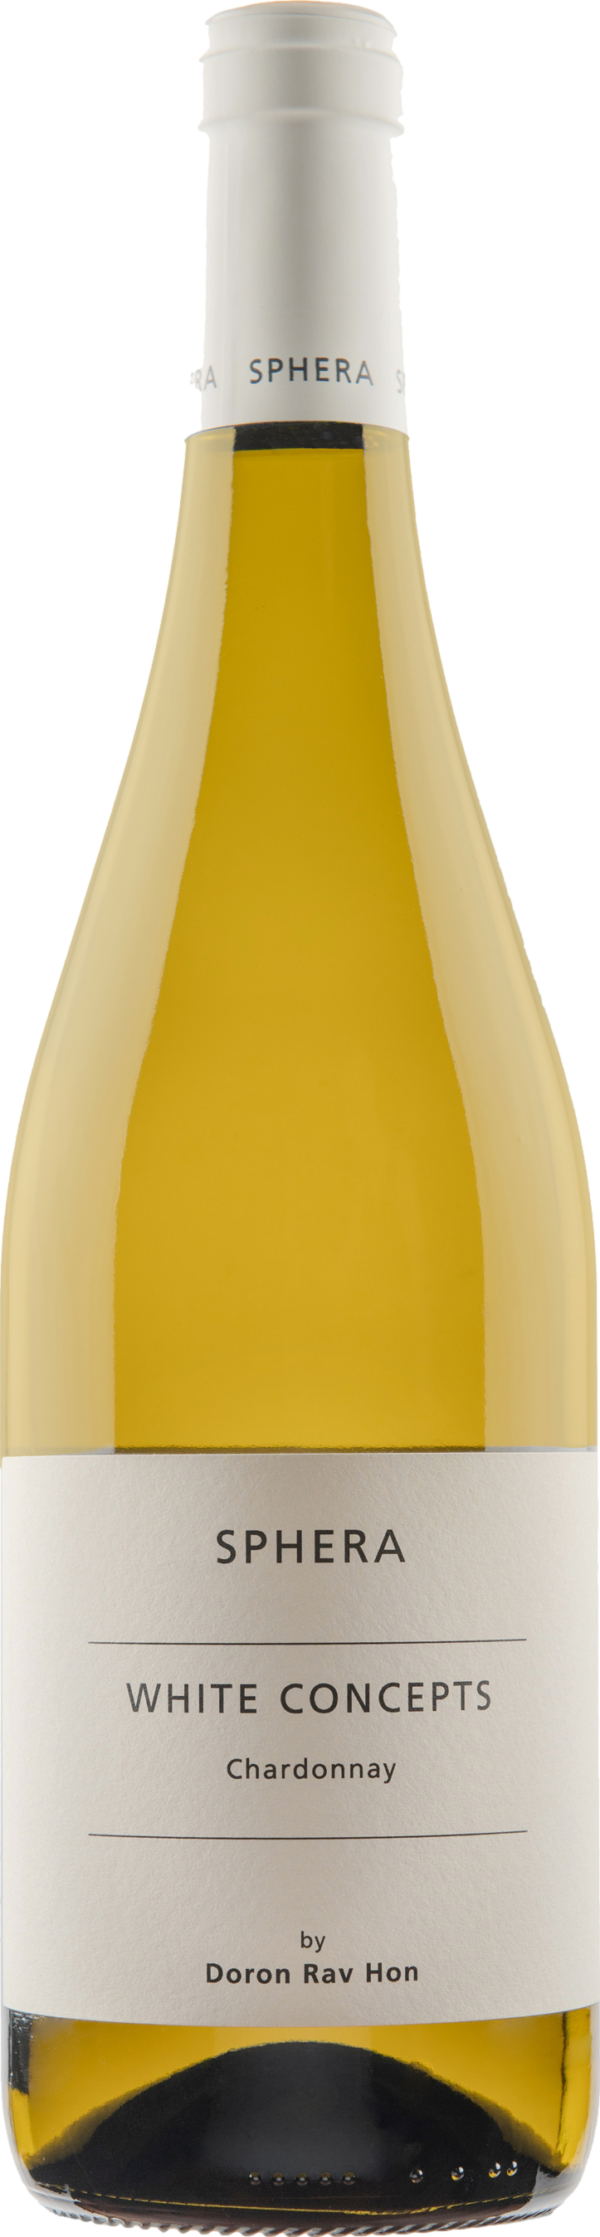 Product image of Sphera White Concepts Chardonnay 2022 from 8wines